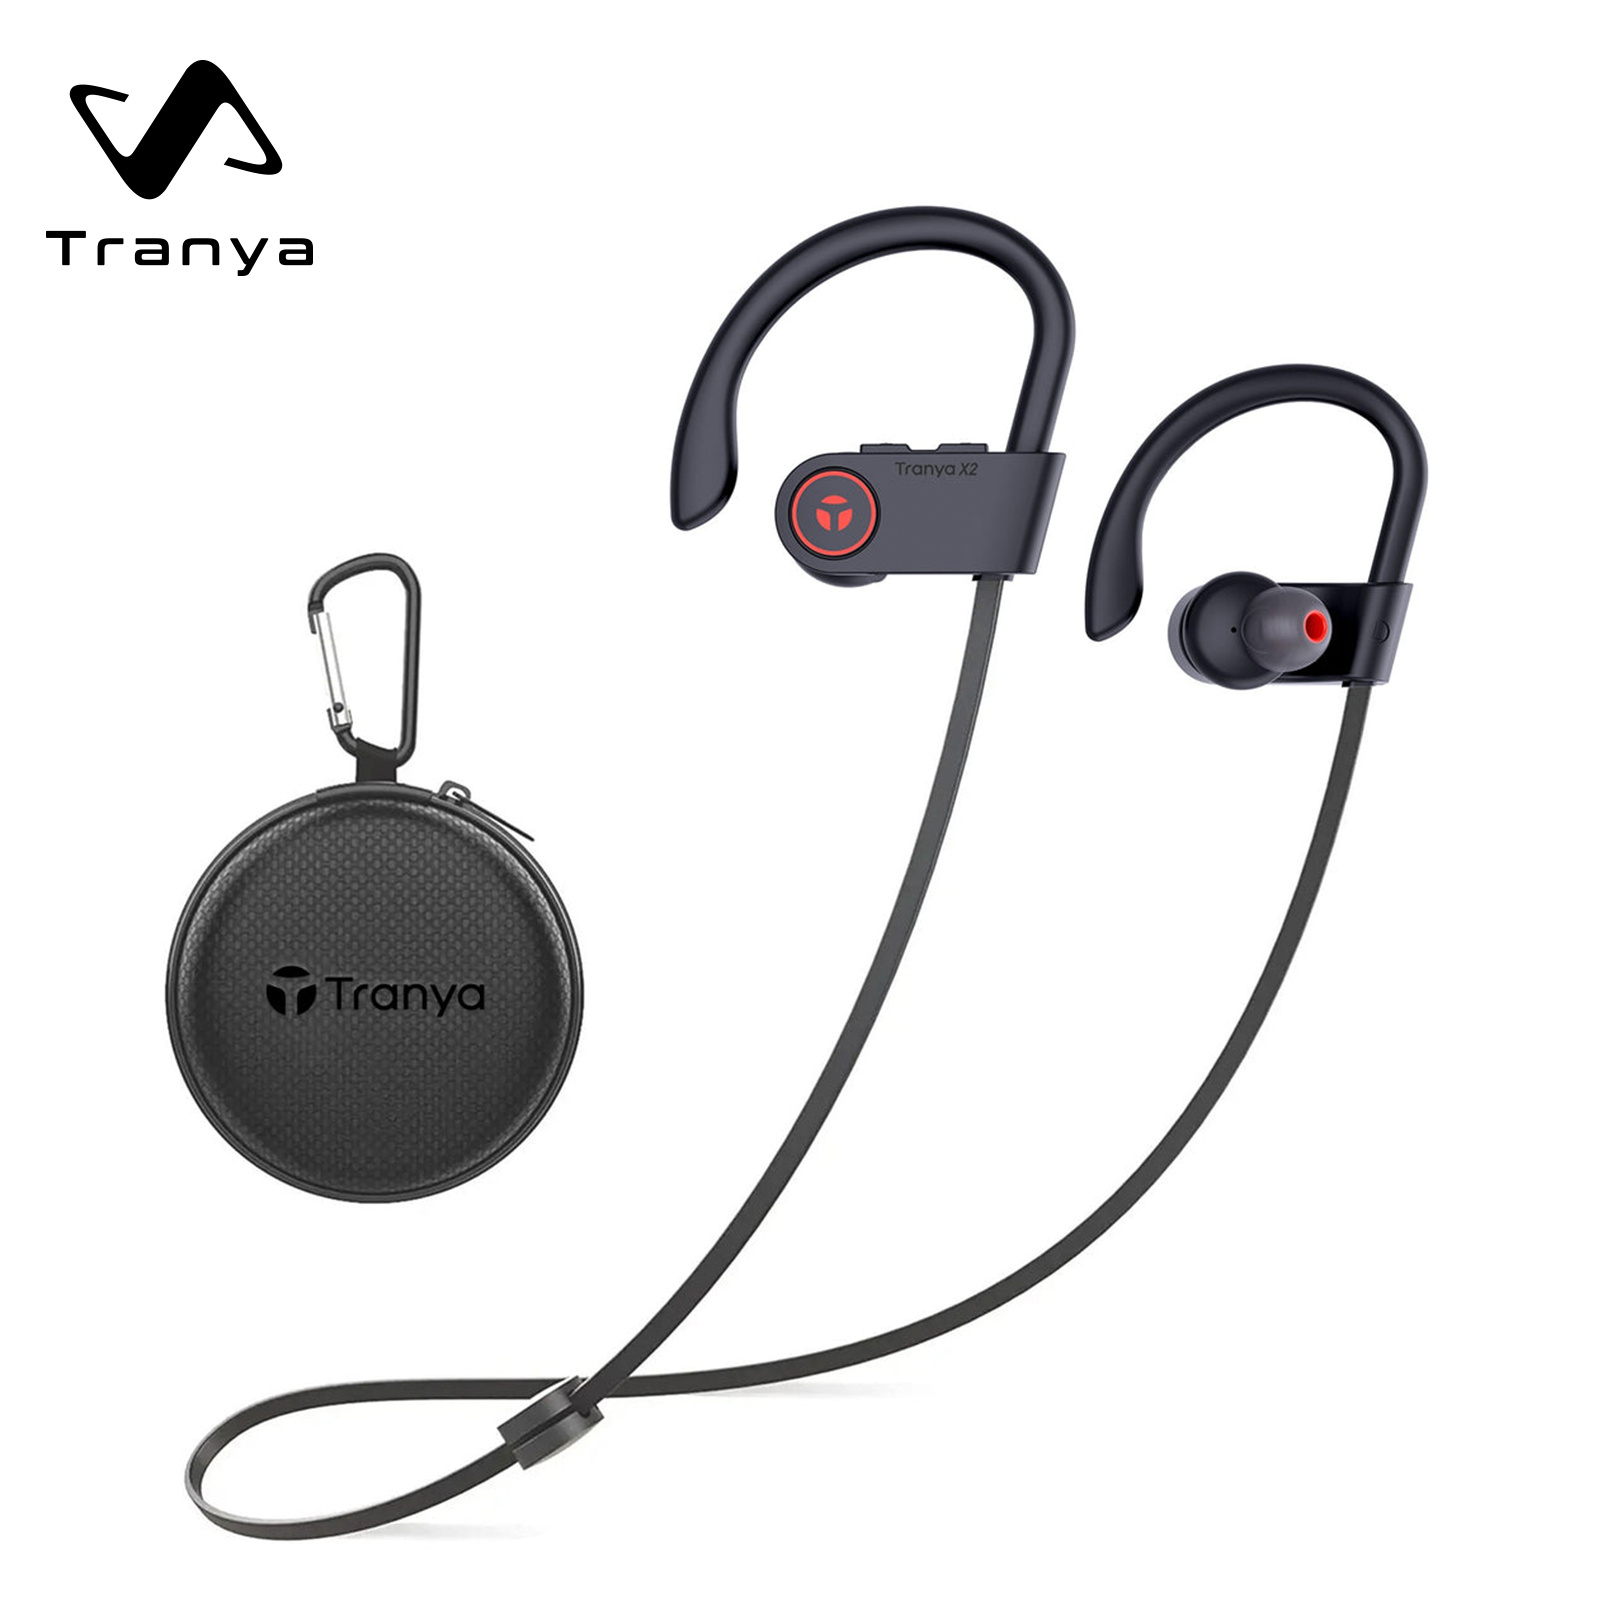 

X2 Wireless Sports Earbuds With 12h Playtime Type-c Charging, 11mm Driver For Premium Sound